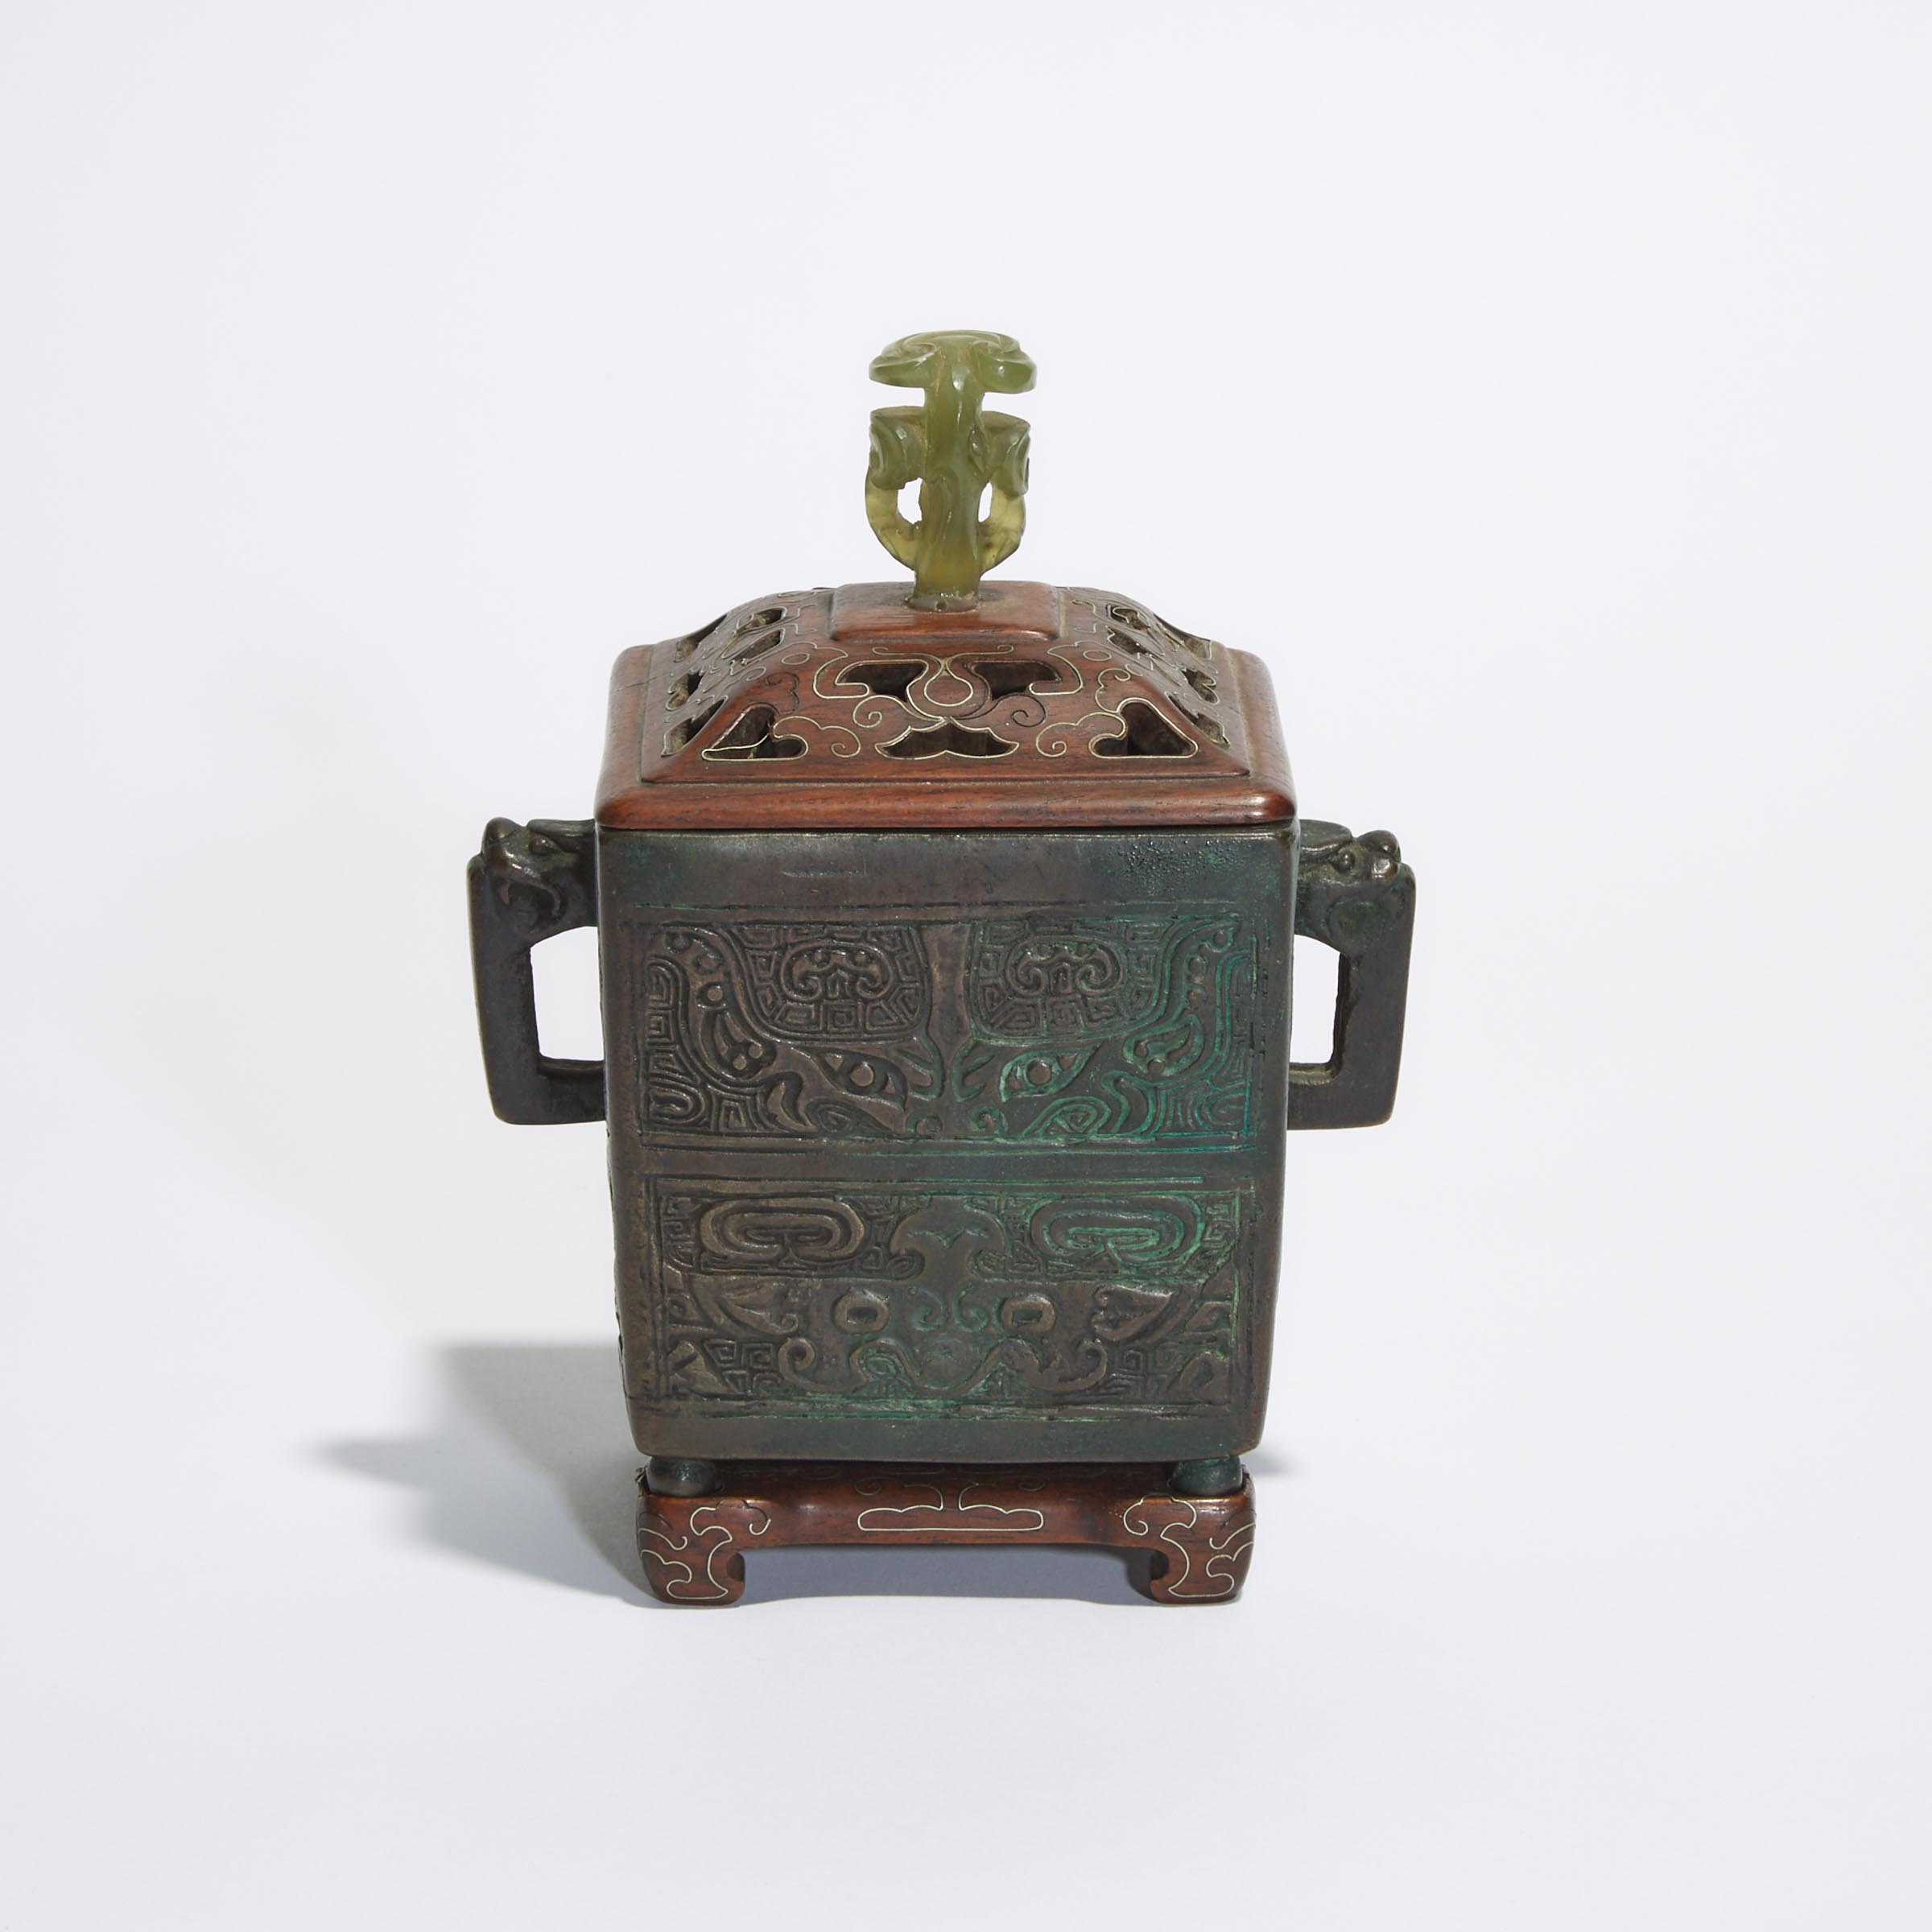 A Bronze Archaistic Square-Section Censer, Cover and Stand, 18th Century or Later